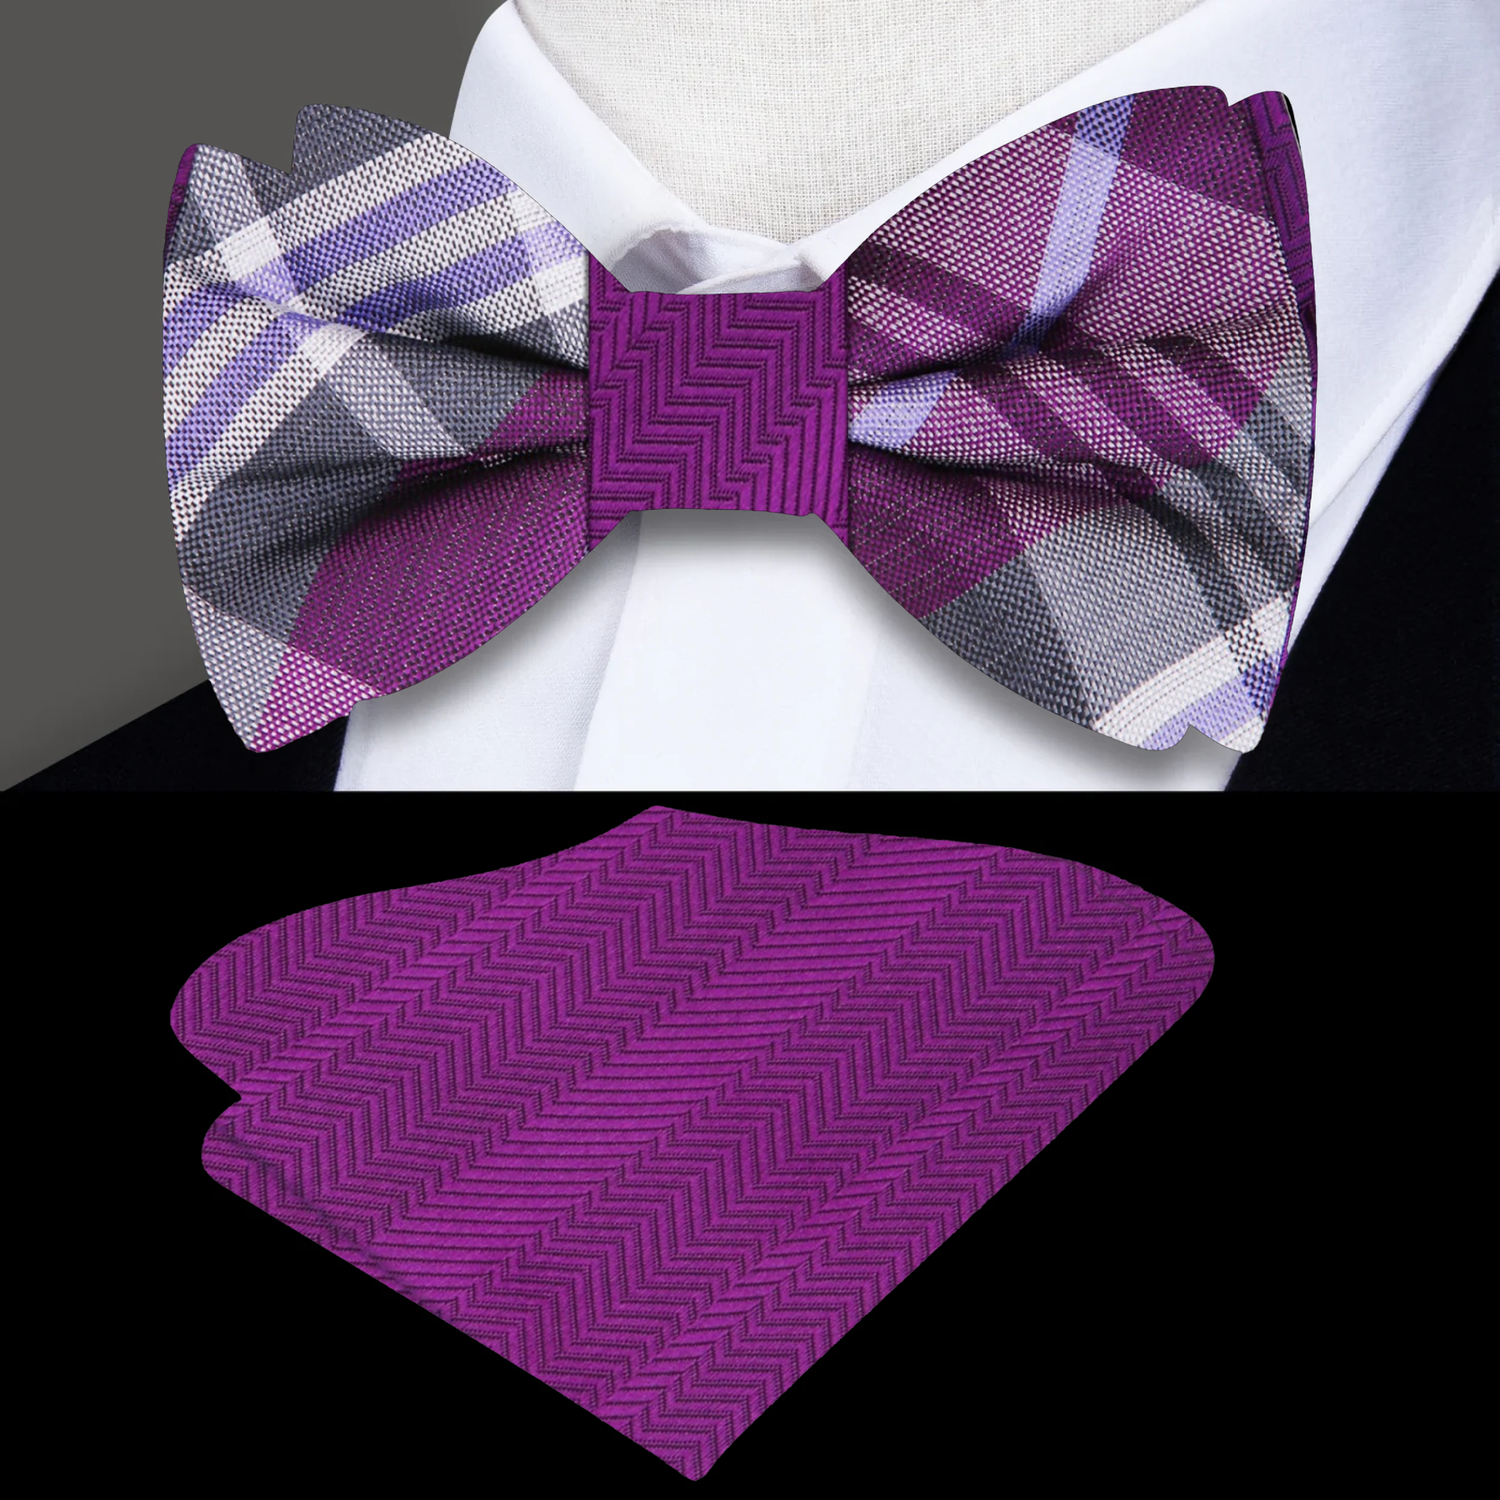 Main View: Purple, Grey Plaid Bow Tie and Solid Pocket Square